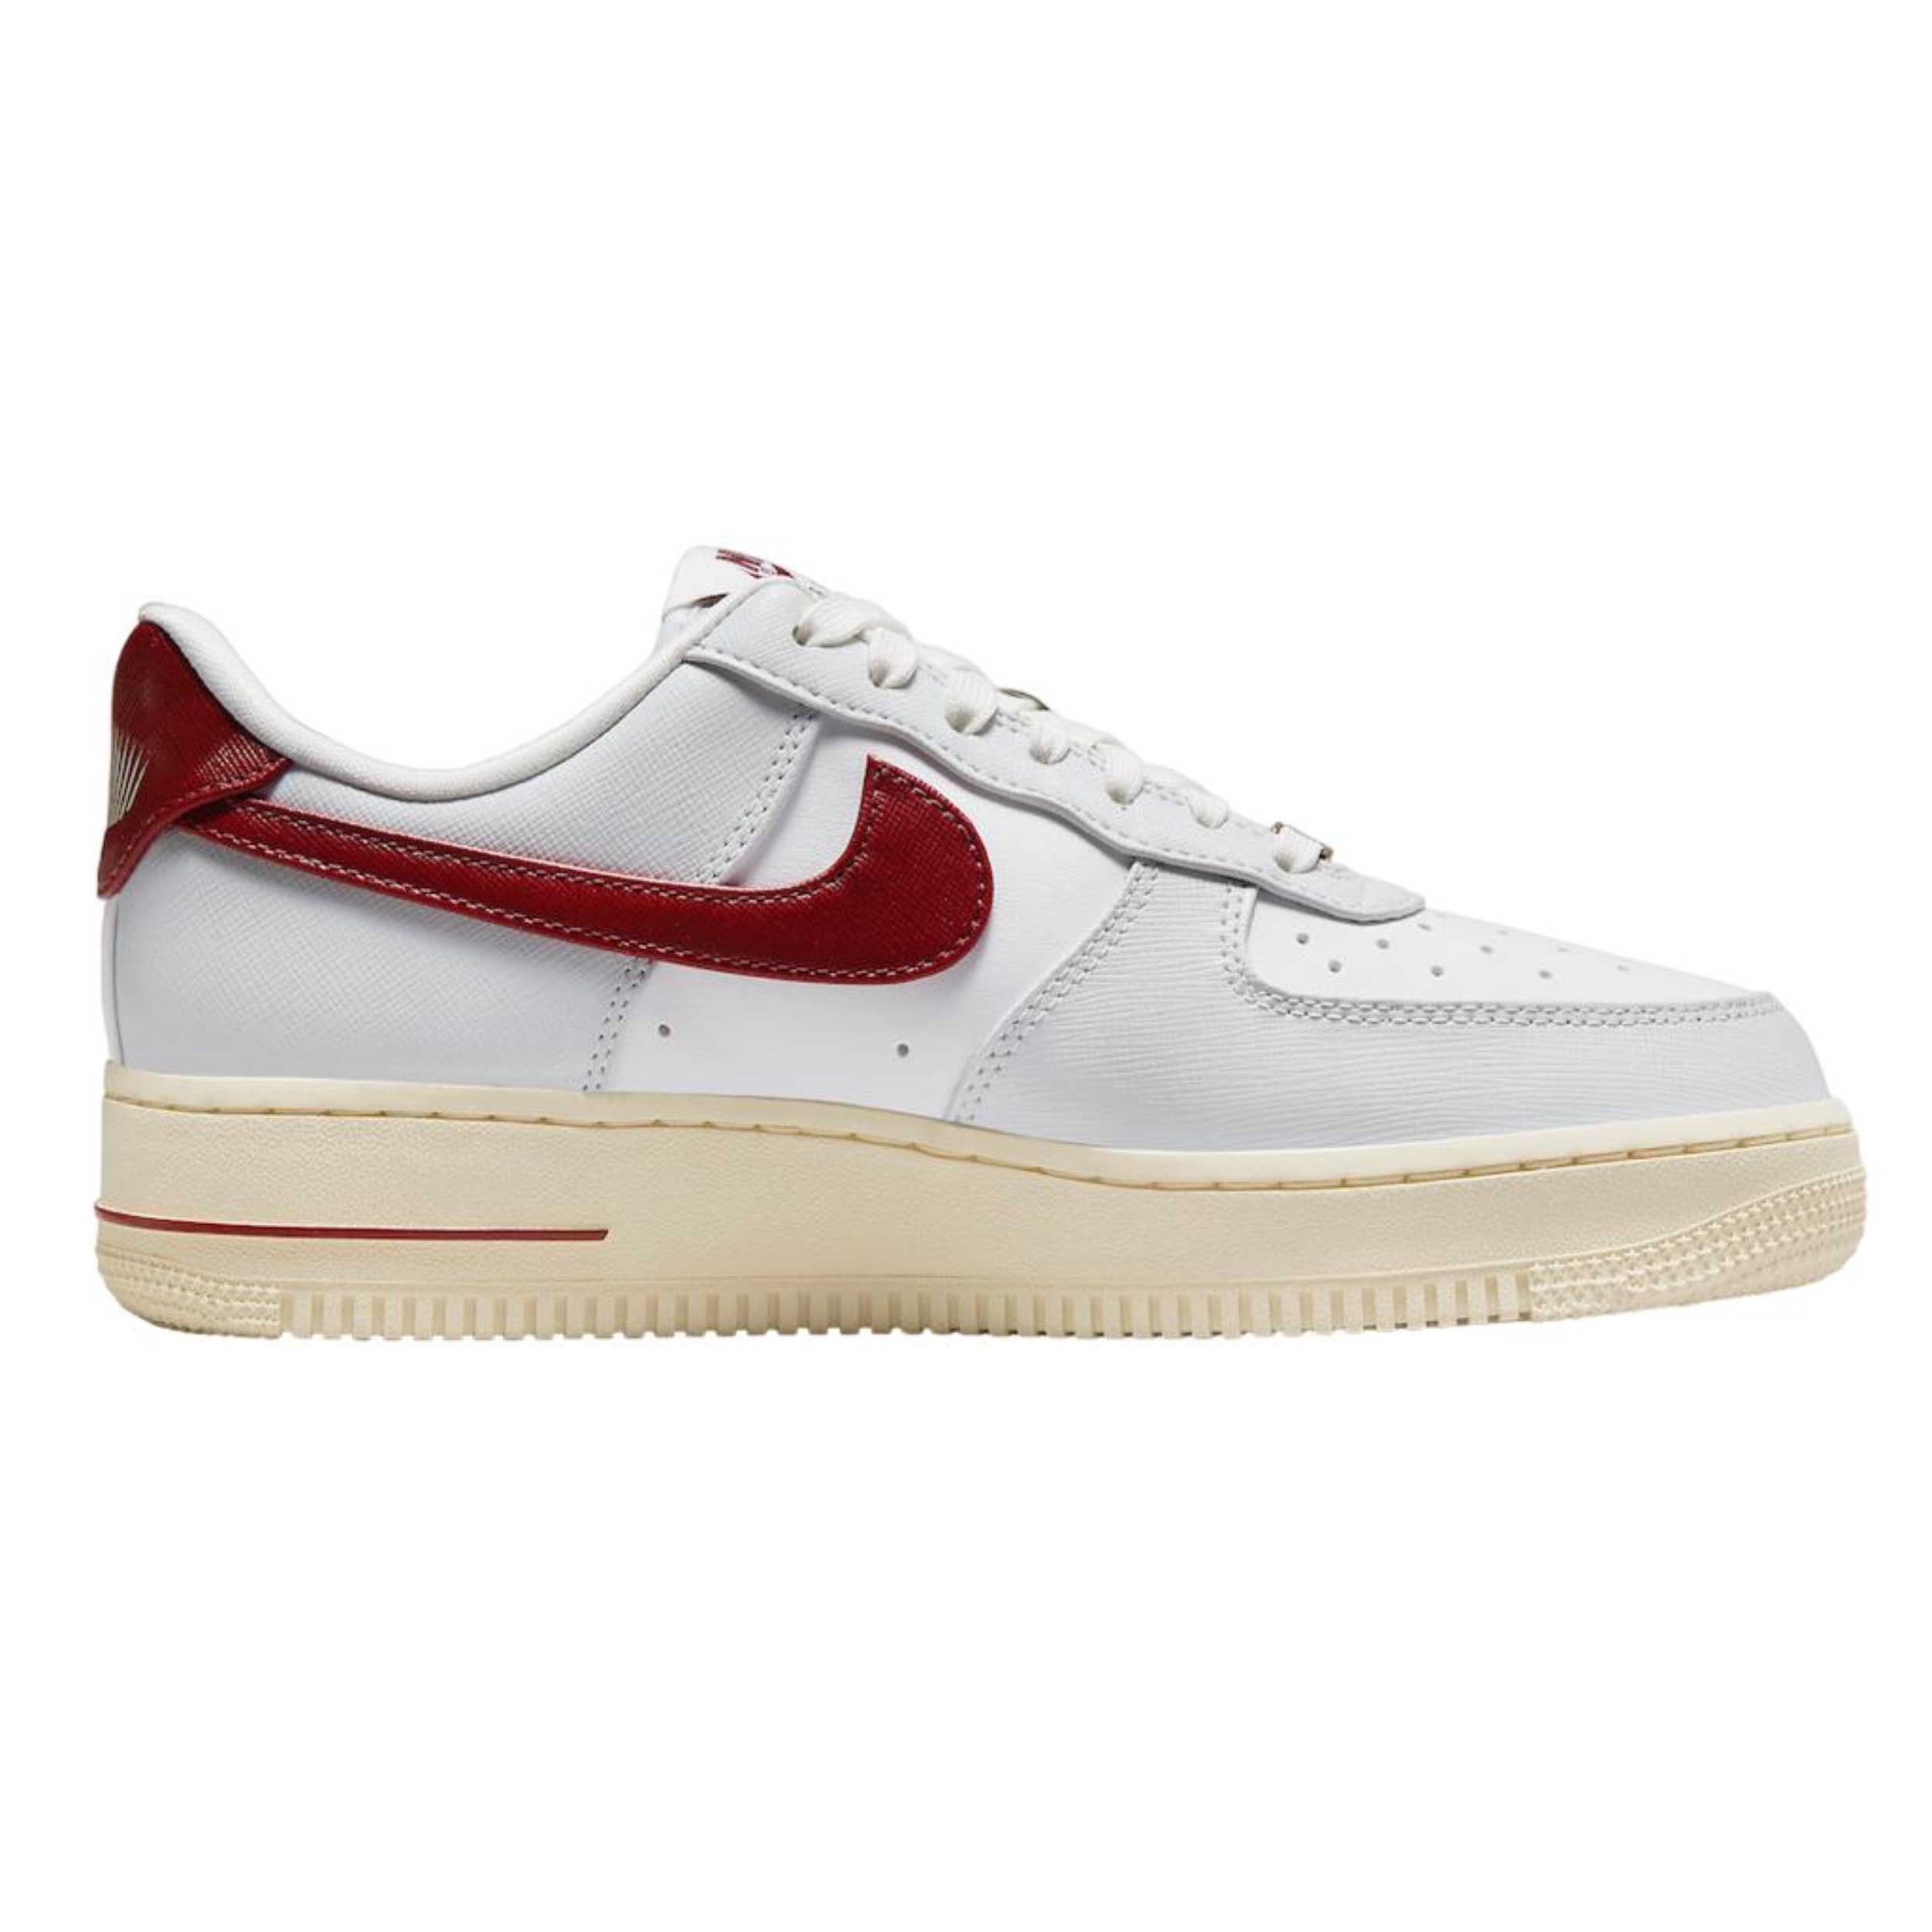 Nike Air Force 1 Low ‘07 SE Just Do It Photon Dust Team Red